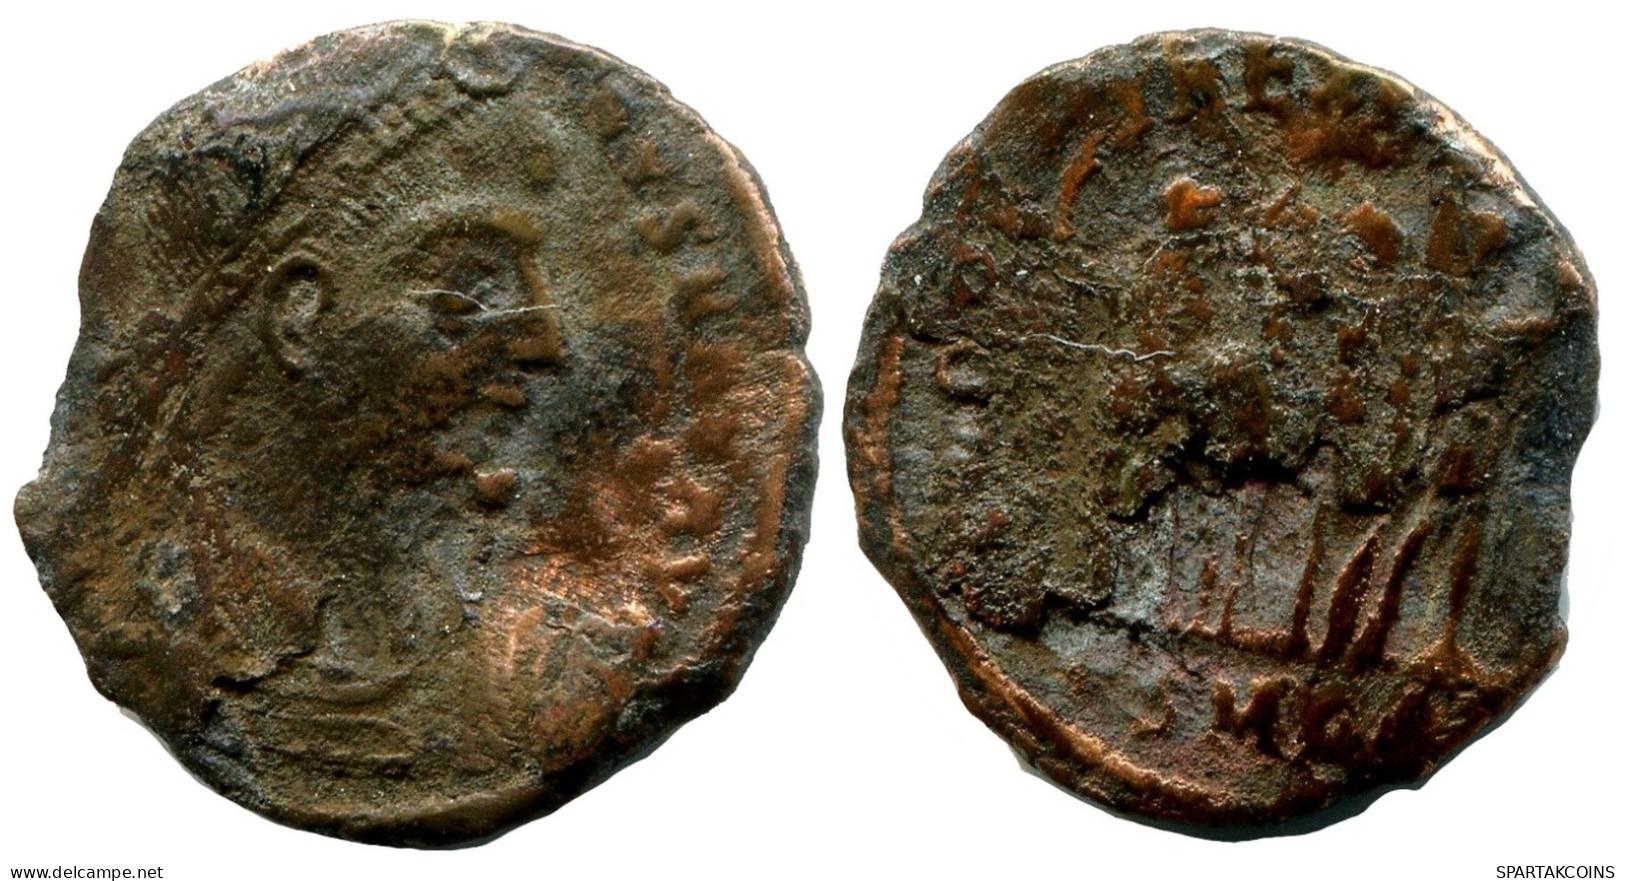 CONSTANTINE I MINTED IN CYZICUS FROM THE ROYAL ONTARIO MUSEUM #ANC11015.14.F.A - Der Christlischen Kaiser (307 / 363)